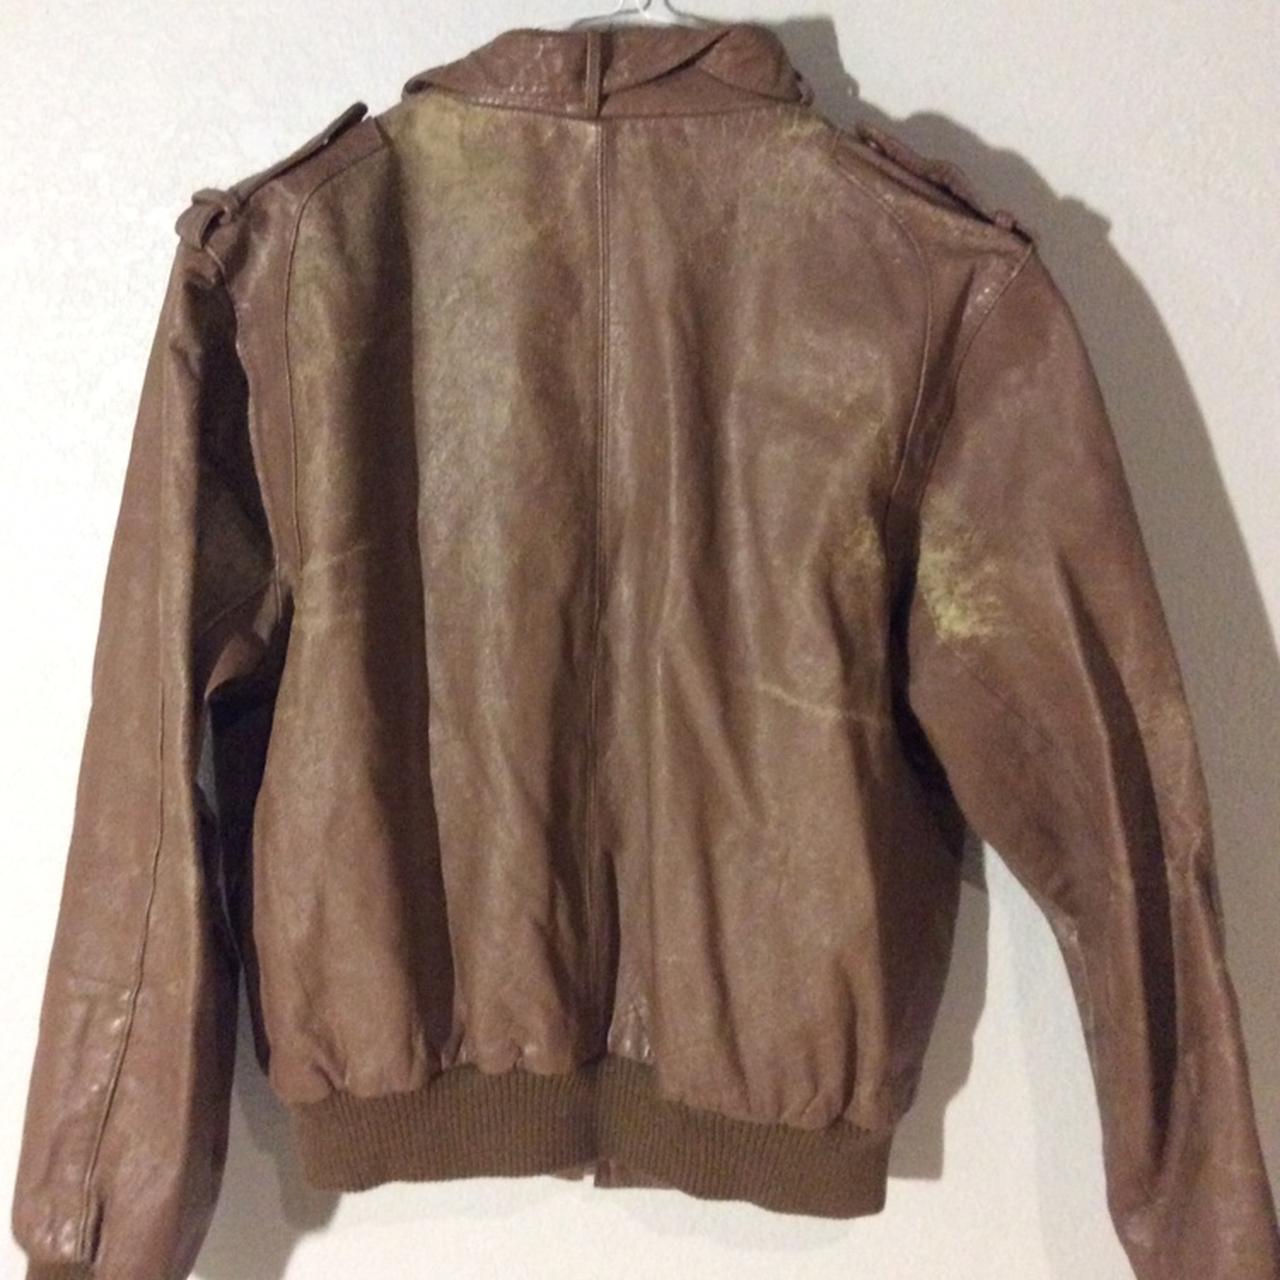 Crazy leather jacket by Members Only. Been through a... - Depop